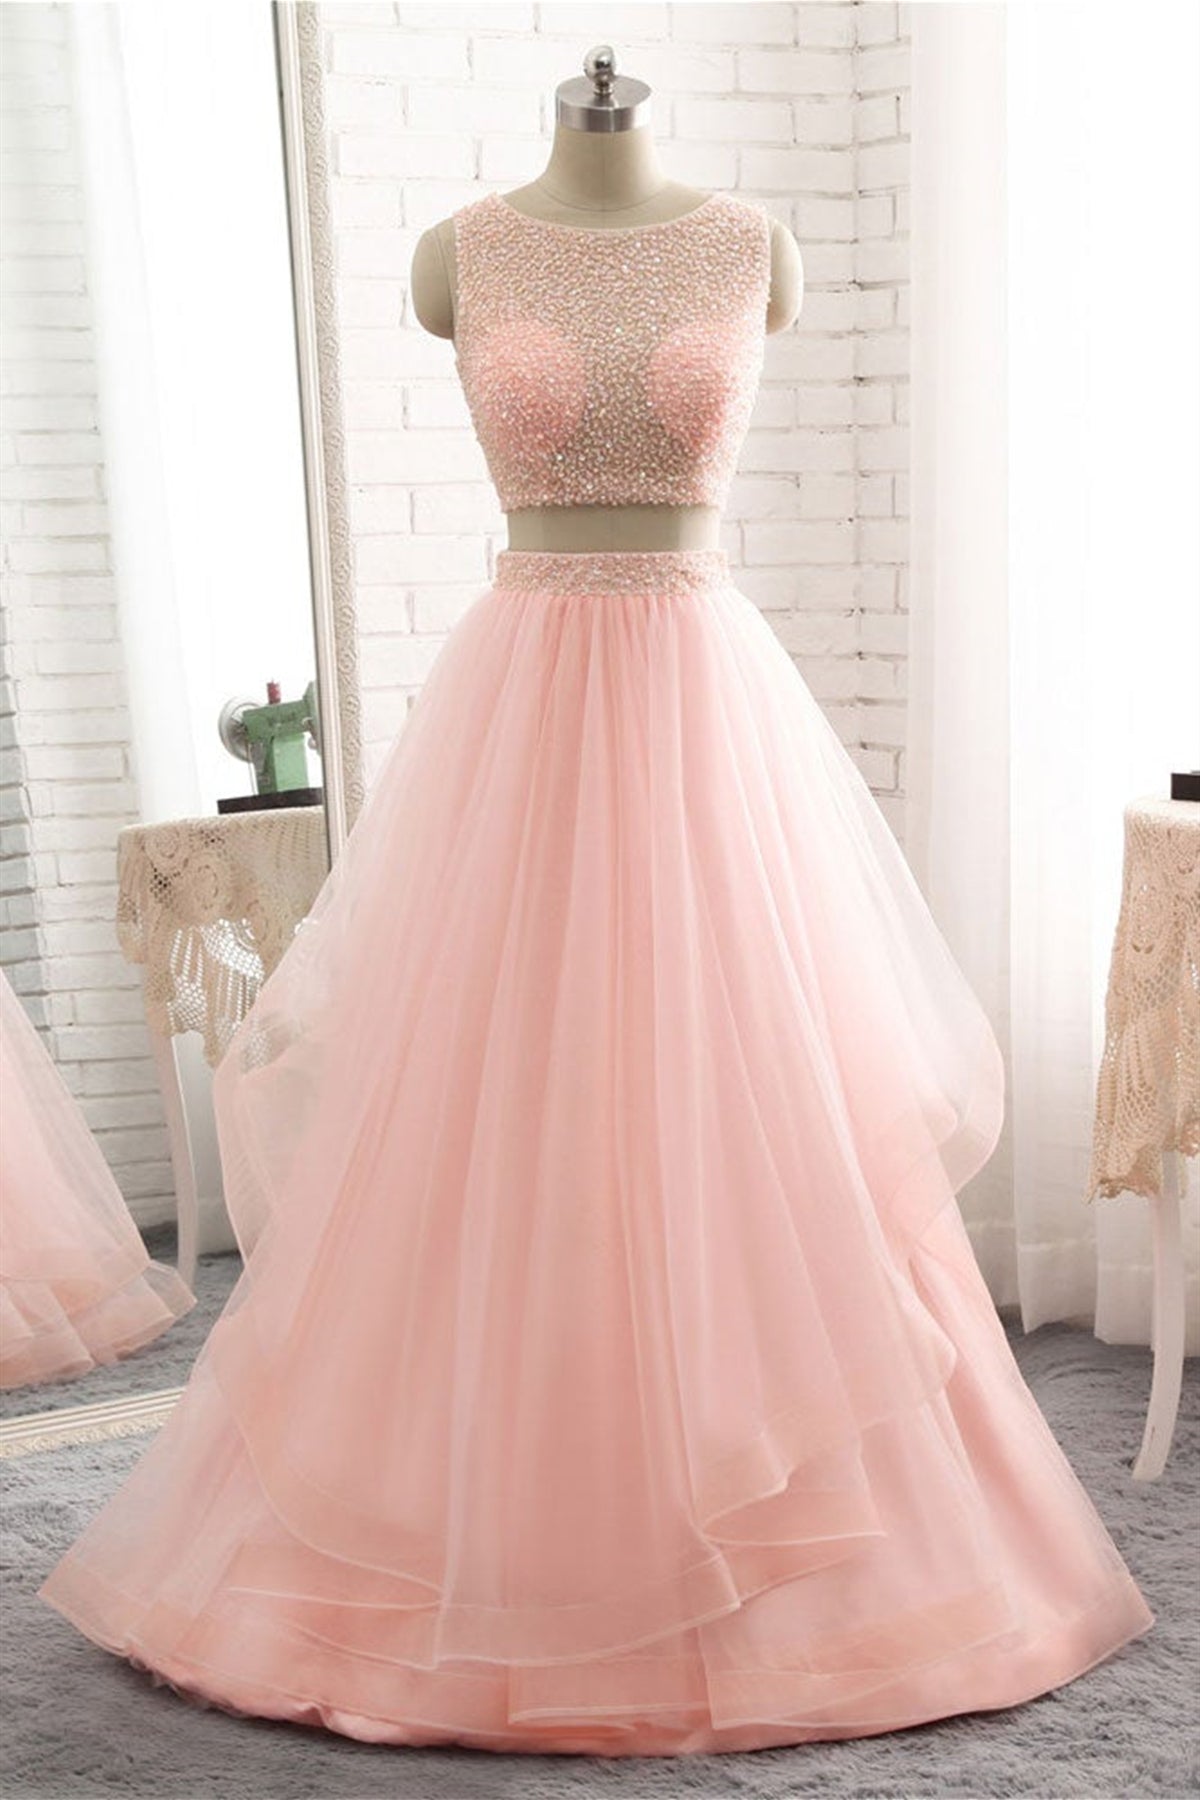 Round Neck Two Pieces Pink Beaded Long Prom Dresses, 2 Pieces Pink Formal Dresses, Beaded Pink Evening Dresses